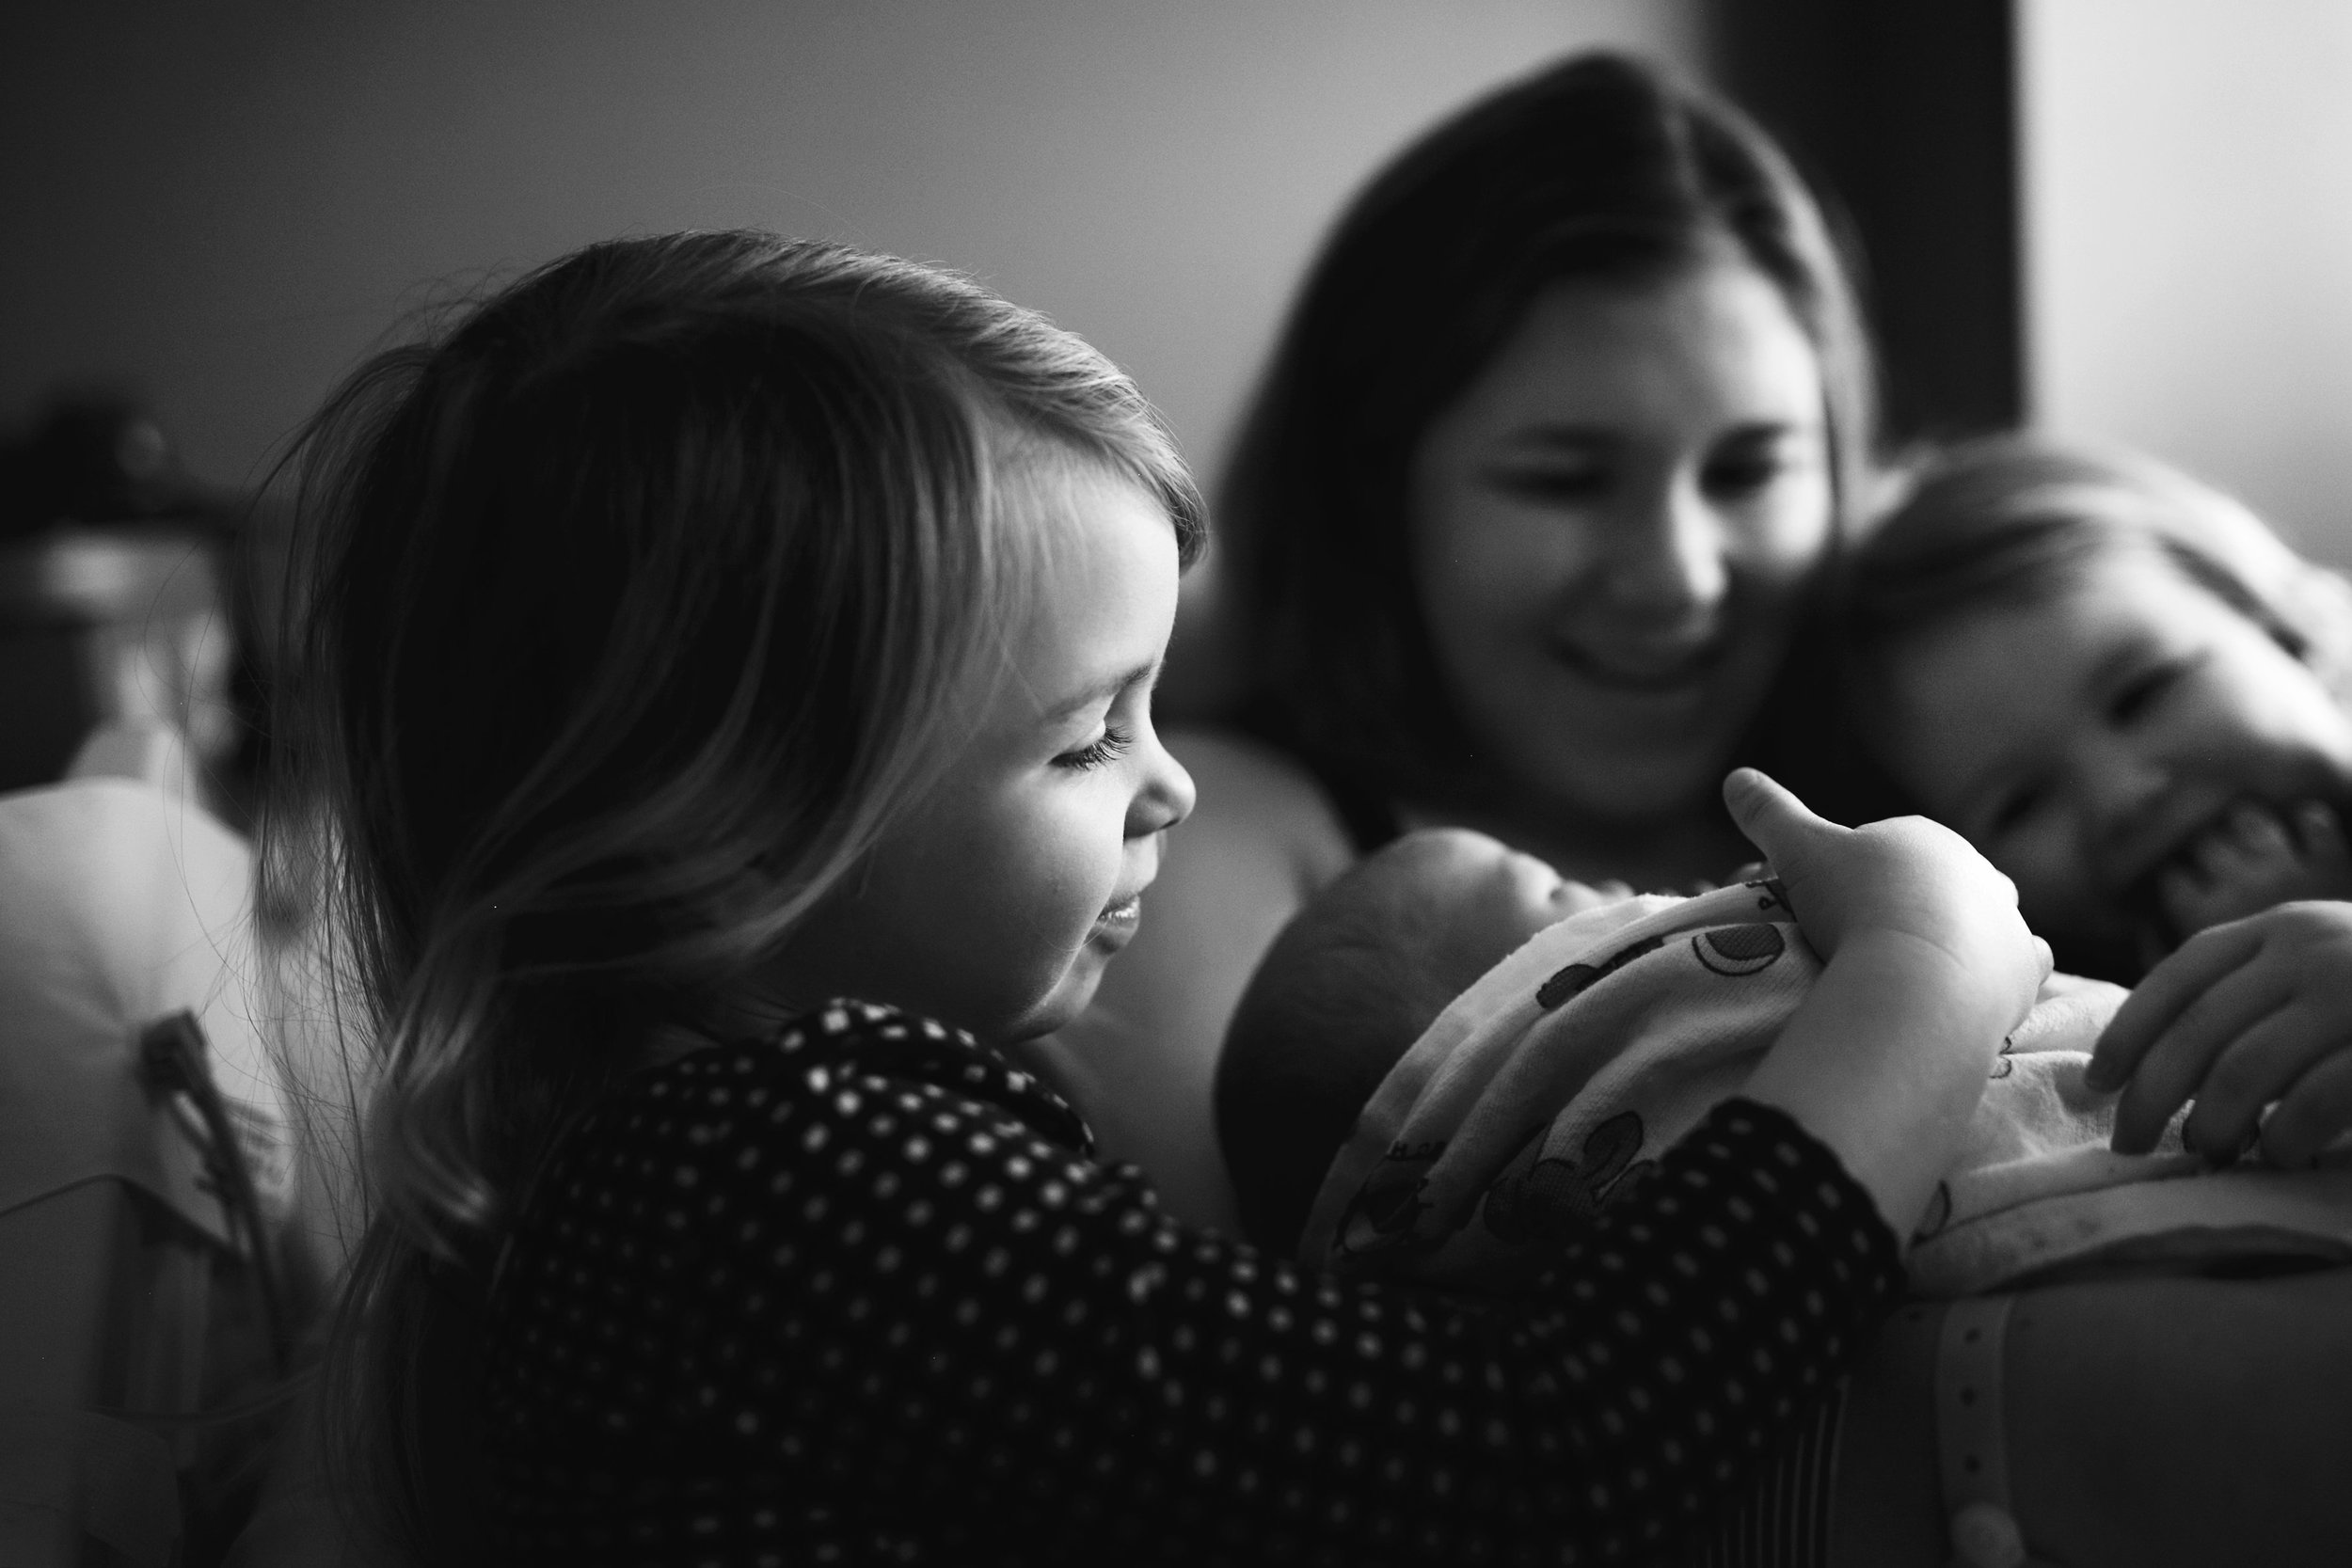 Photo by Megann Robinson - My girls meeting their baby brother for the first time.